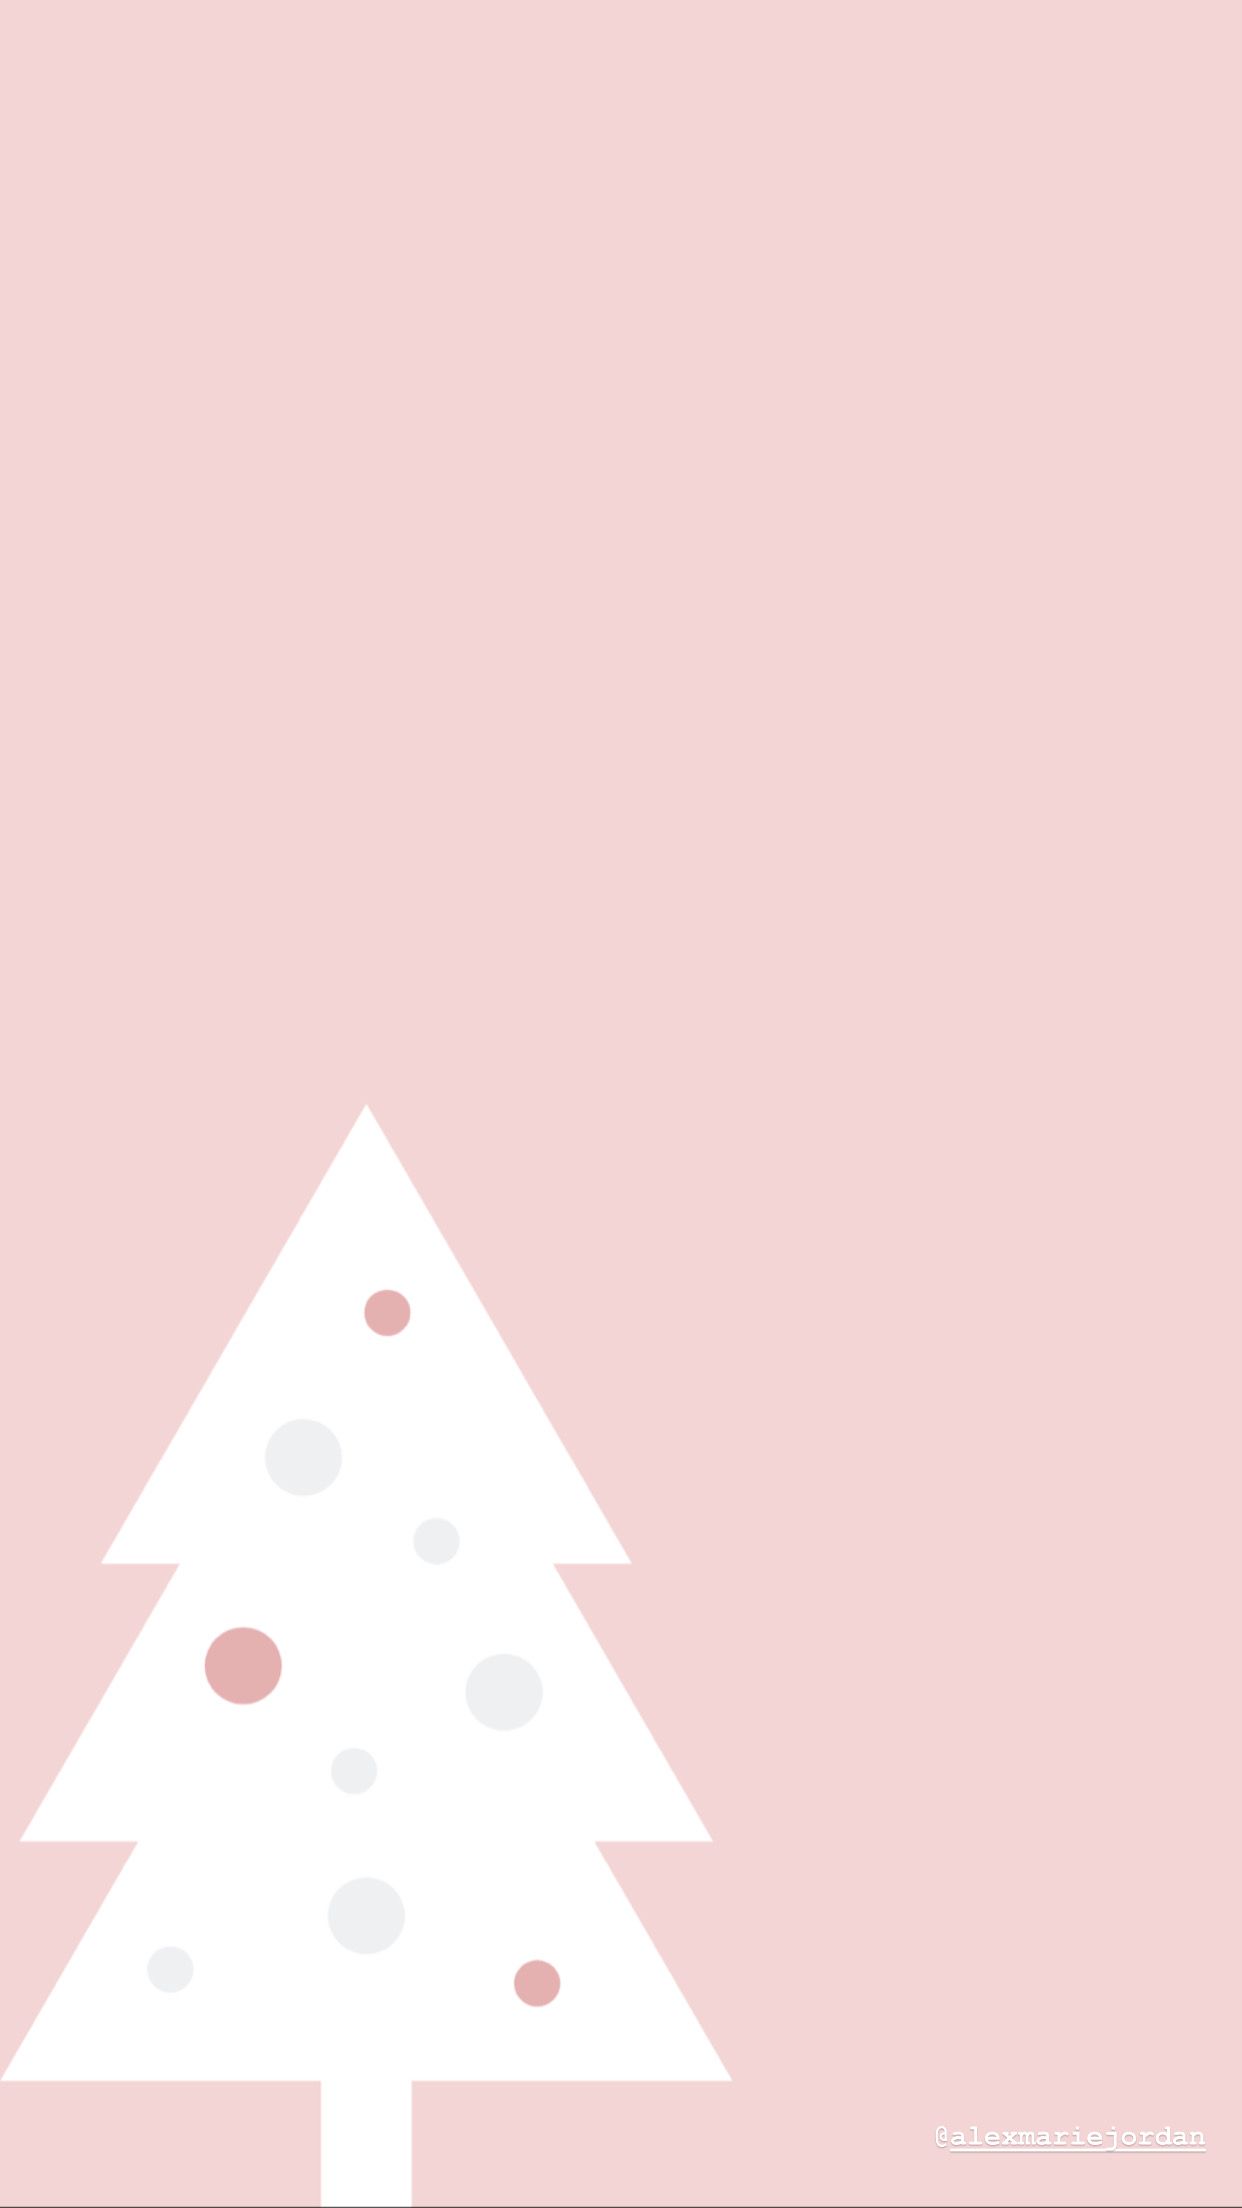 210 Christmas aesthetic wallpapers ideas